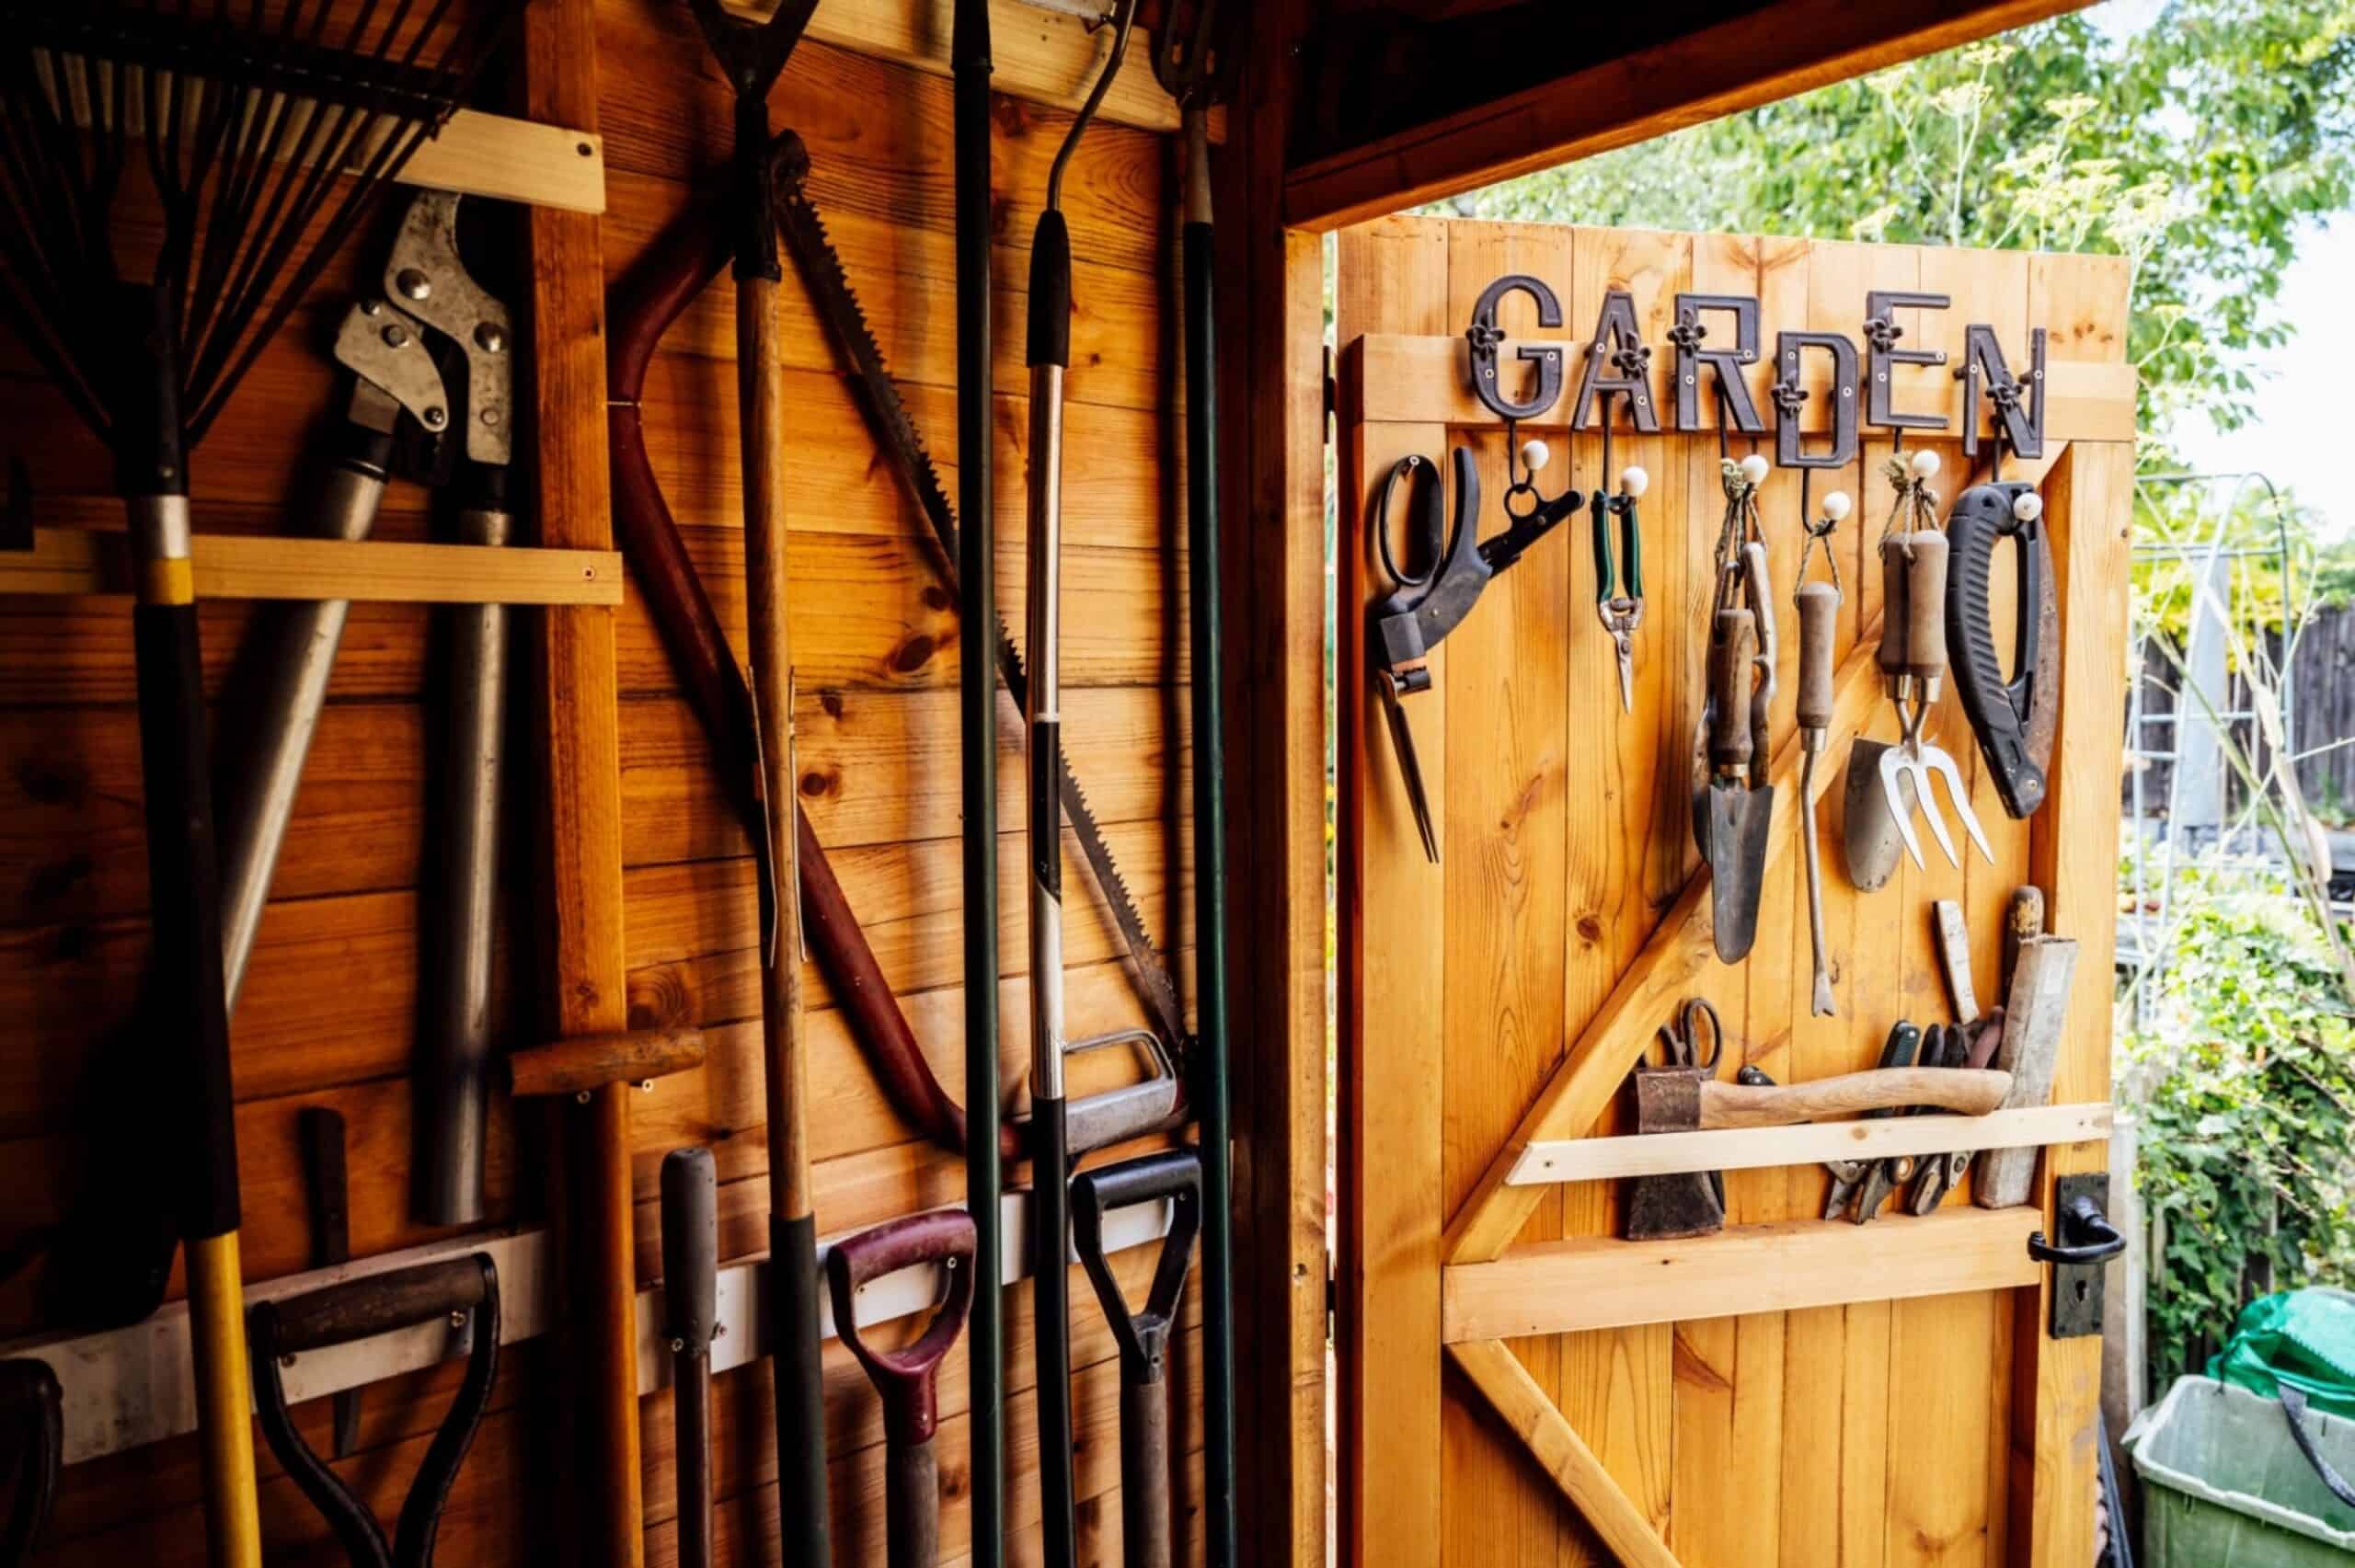 organized shed filled with rake, shovels, trimmer, saw, and other hand tools required for maintenance